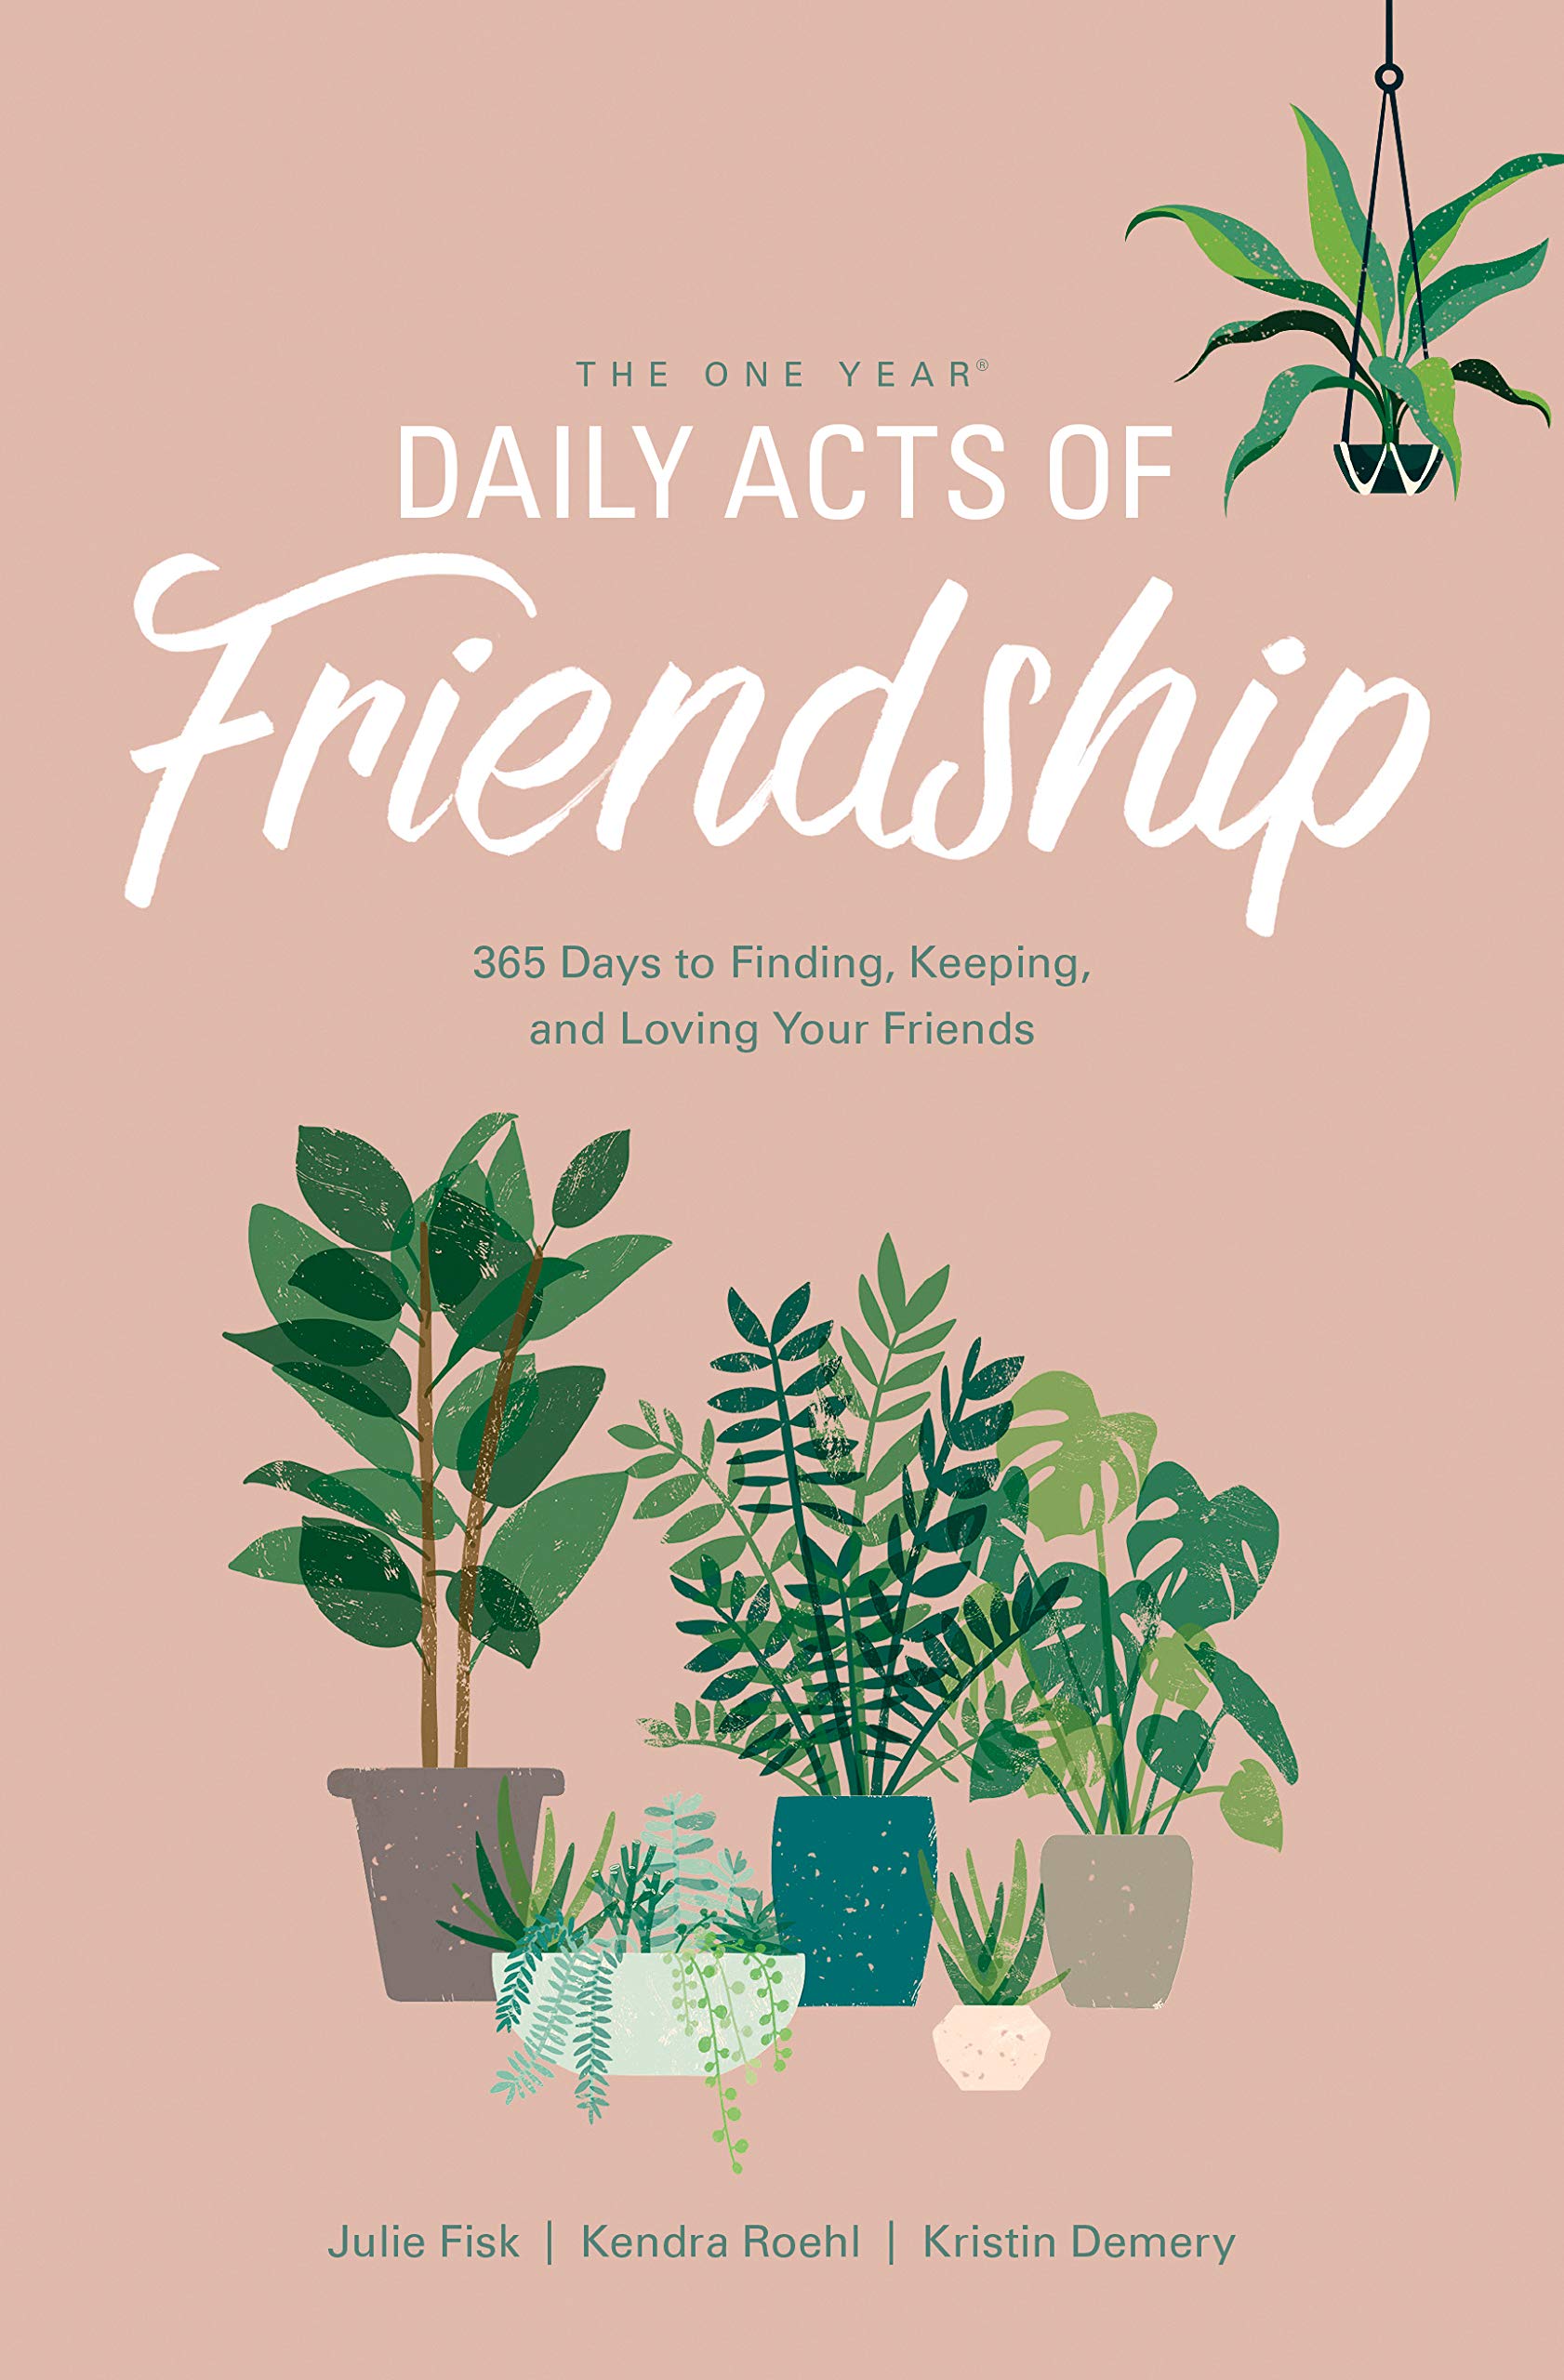 The One Year Daily Acts of Friendship